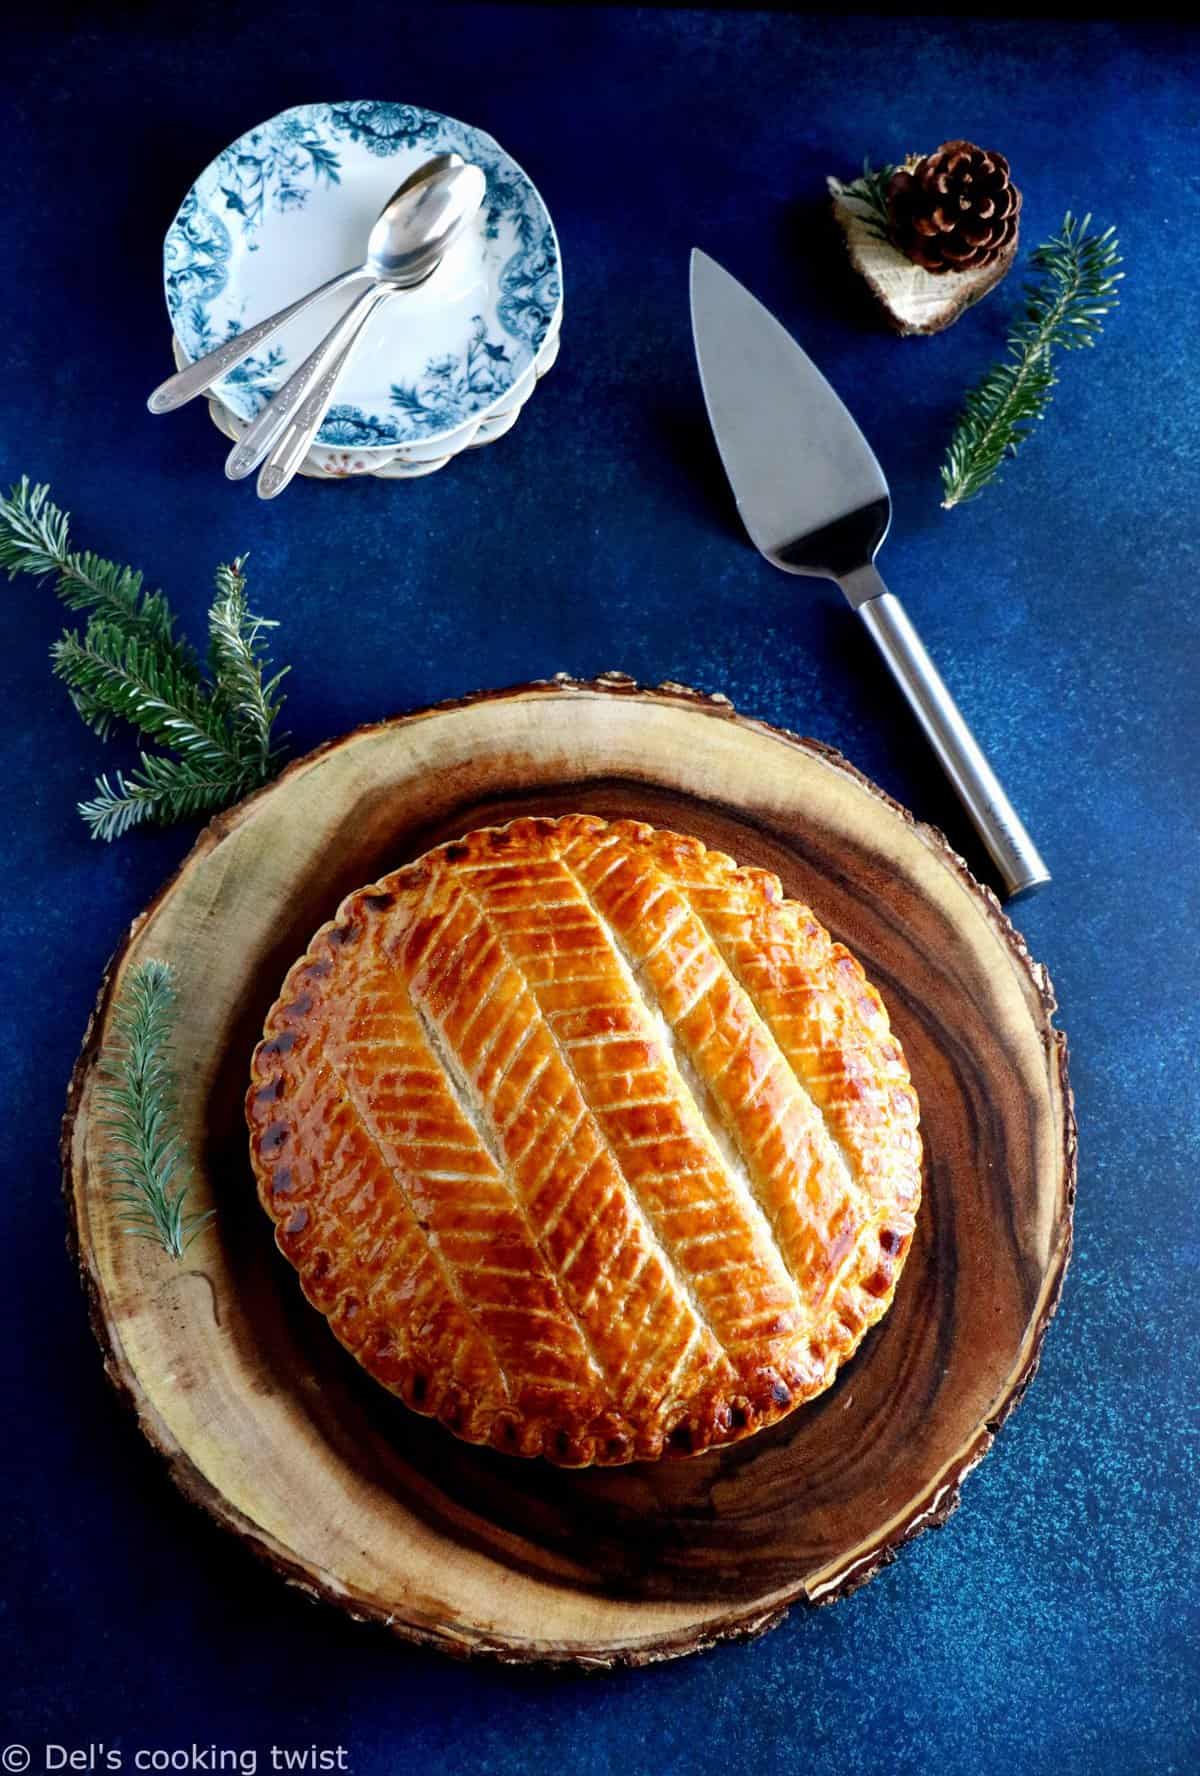 Learn how to bake the traditional French galette des rois with frangipane and a twist of tonka bean bringing stronger vanilla notes.